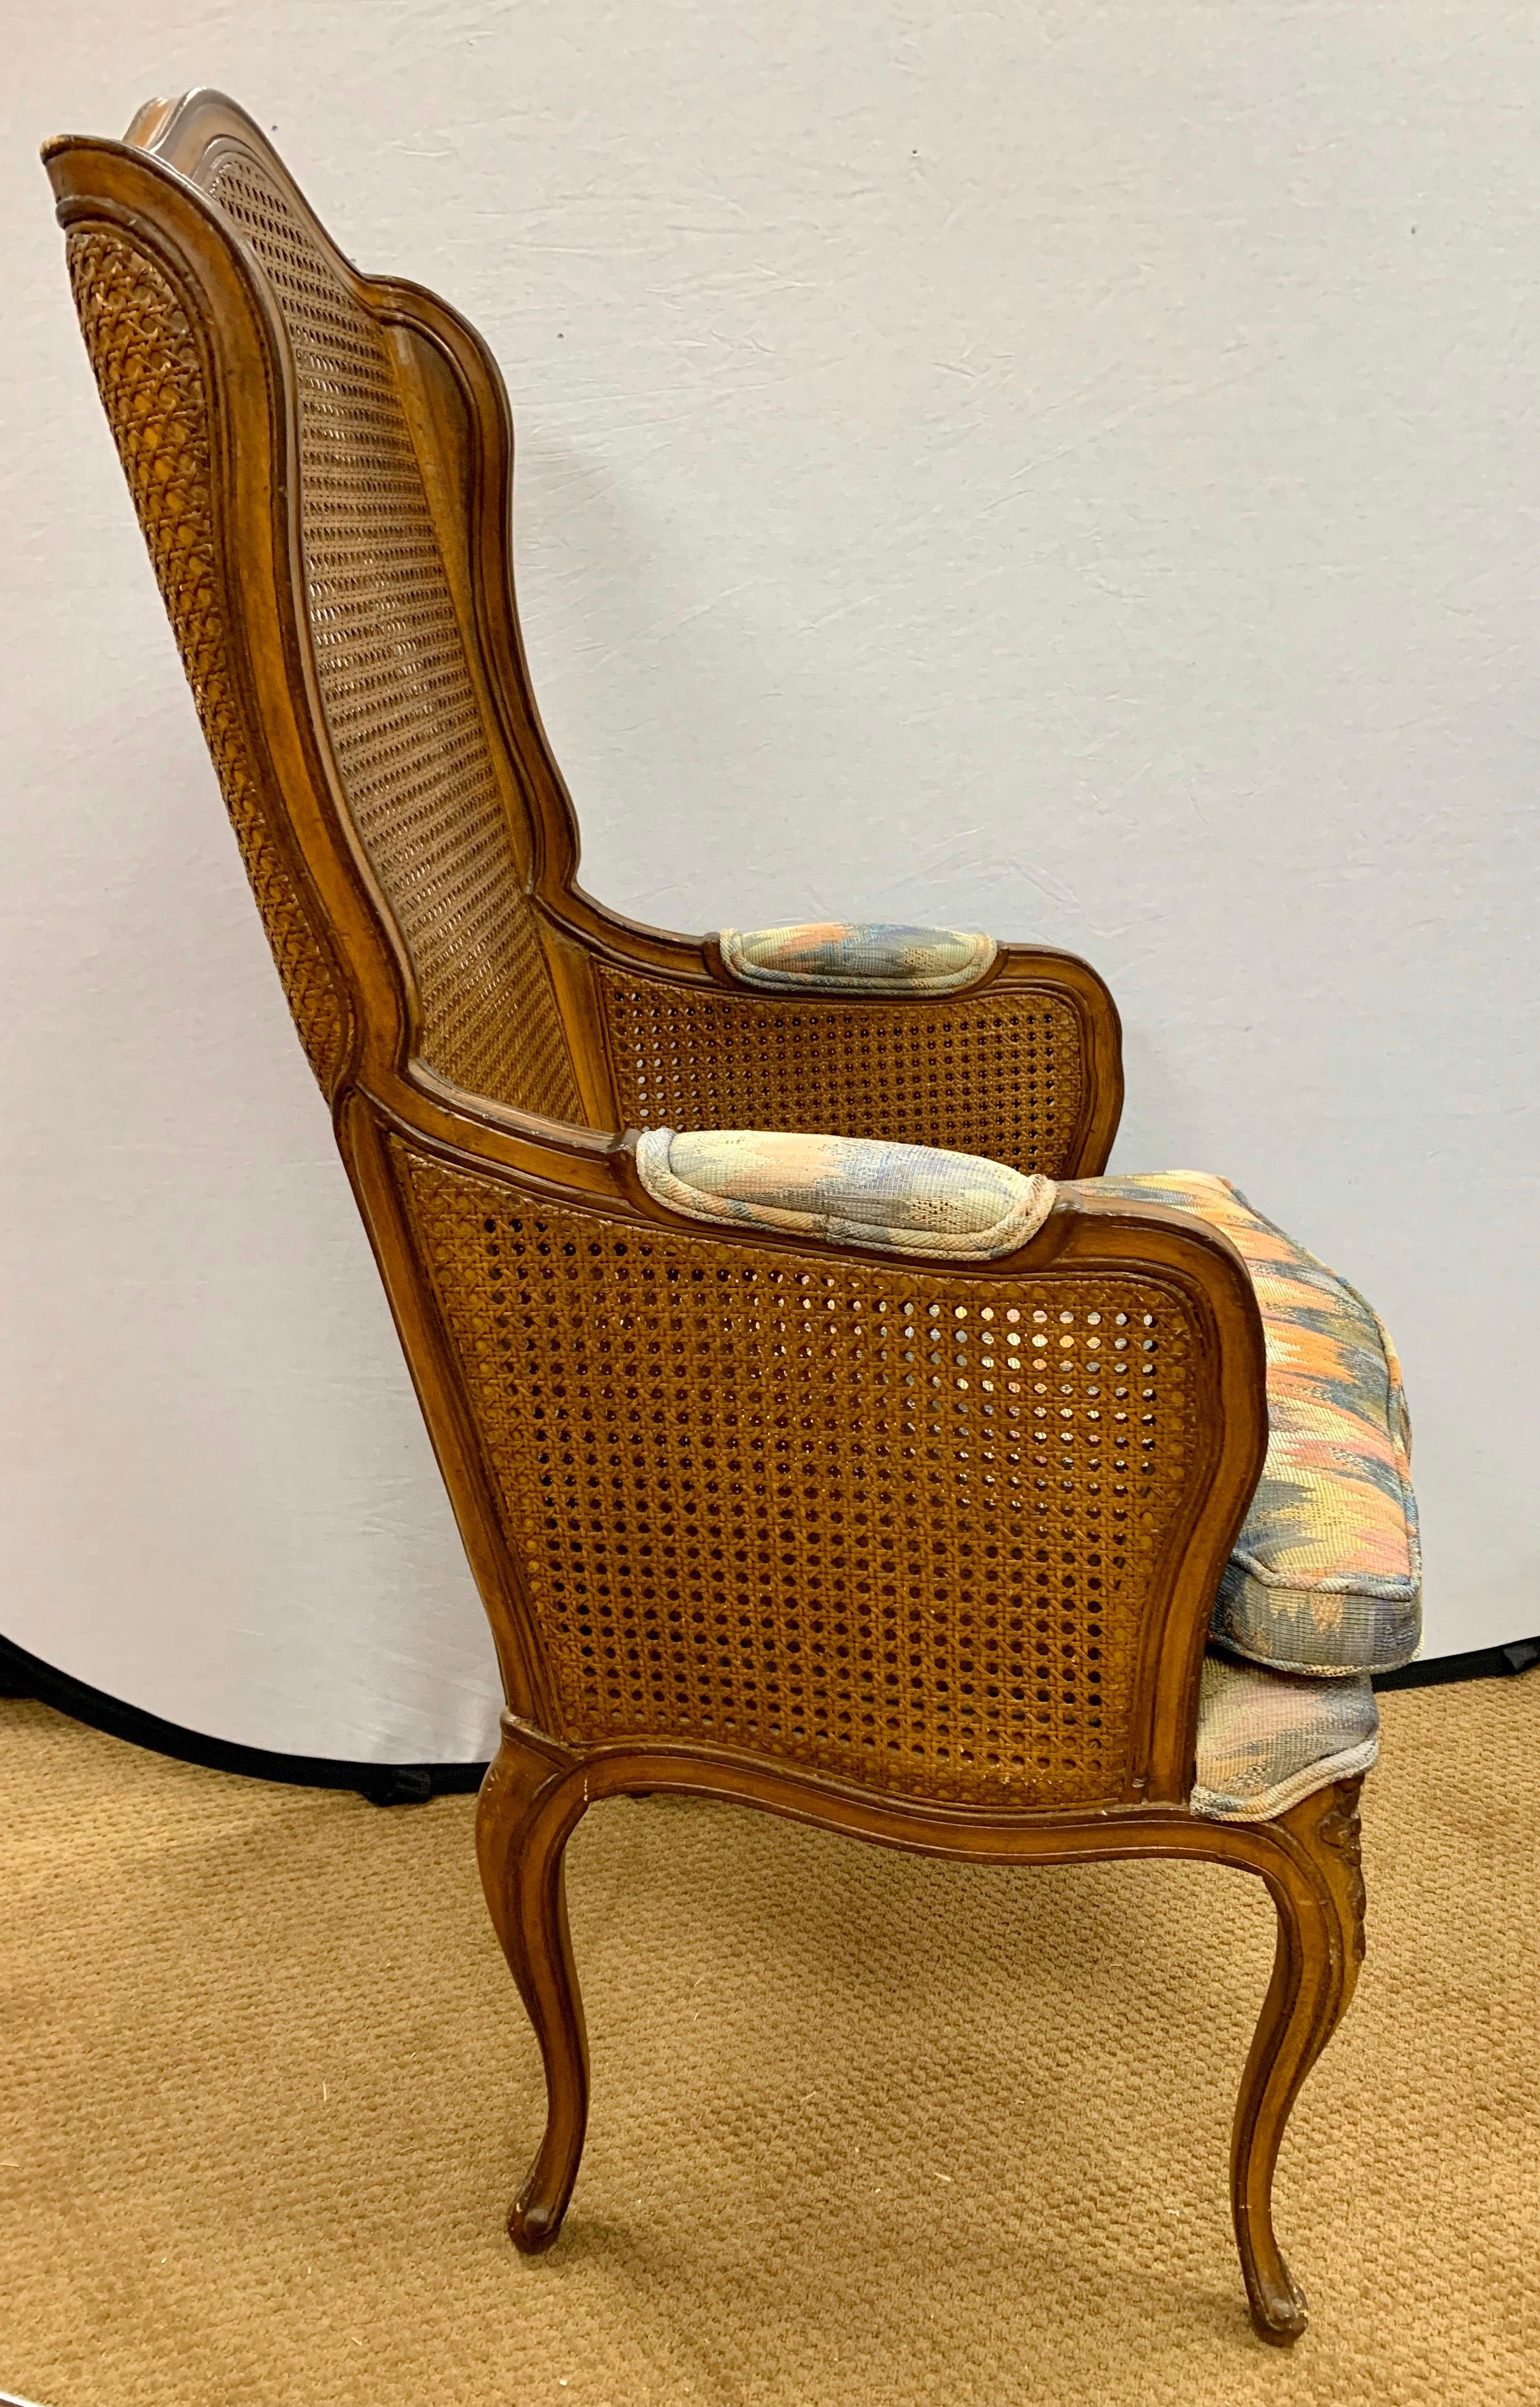 Fabric Pair of Vintage French Cane Wing Back Chairs